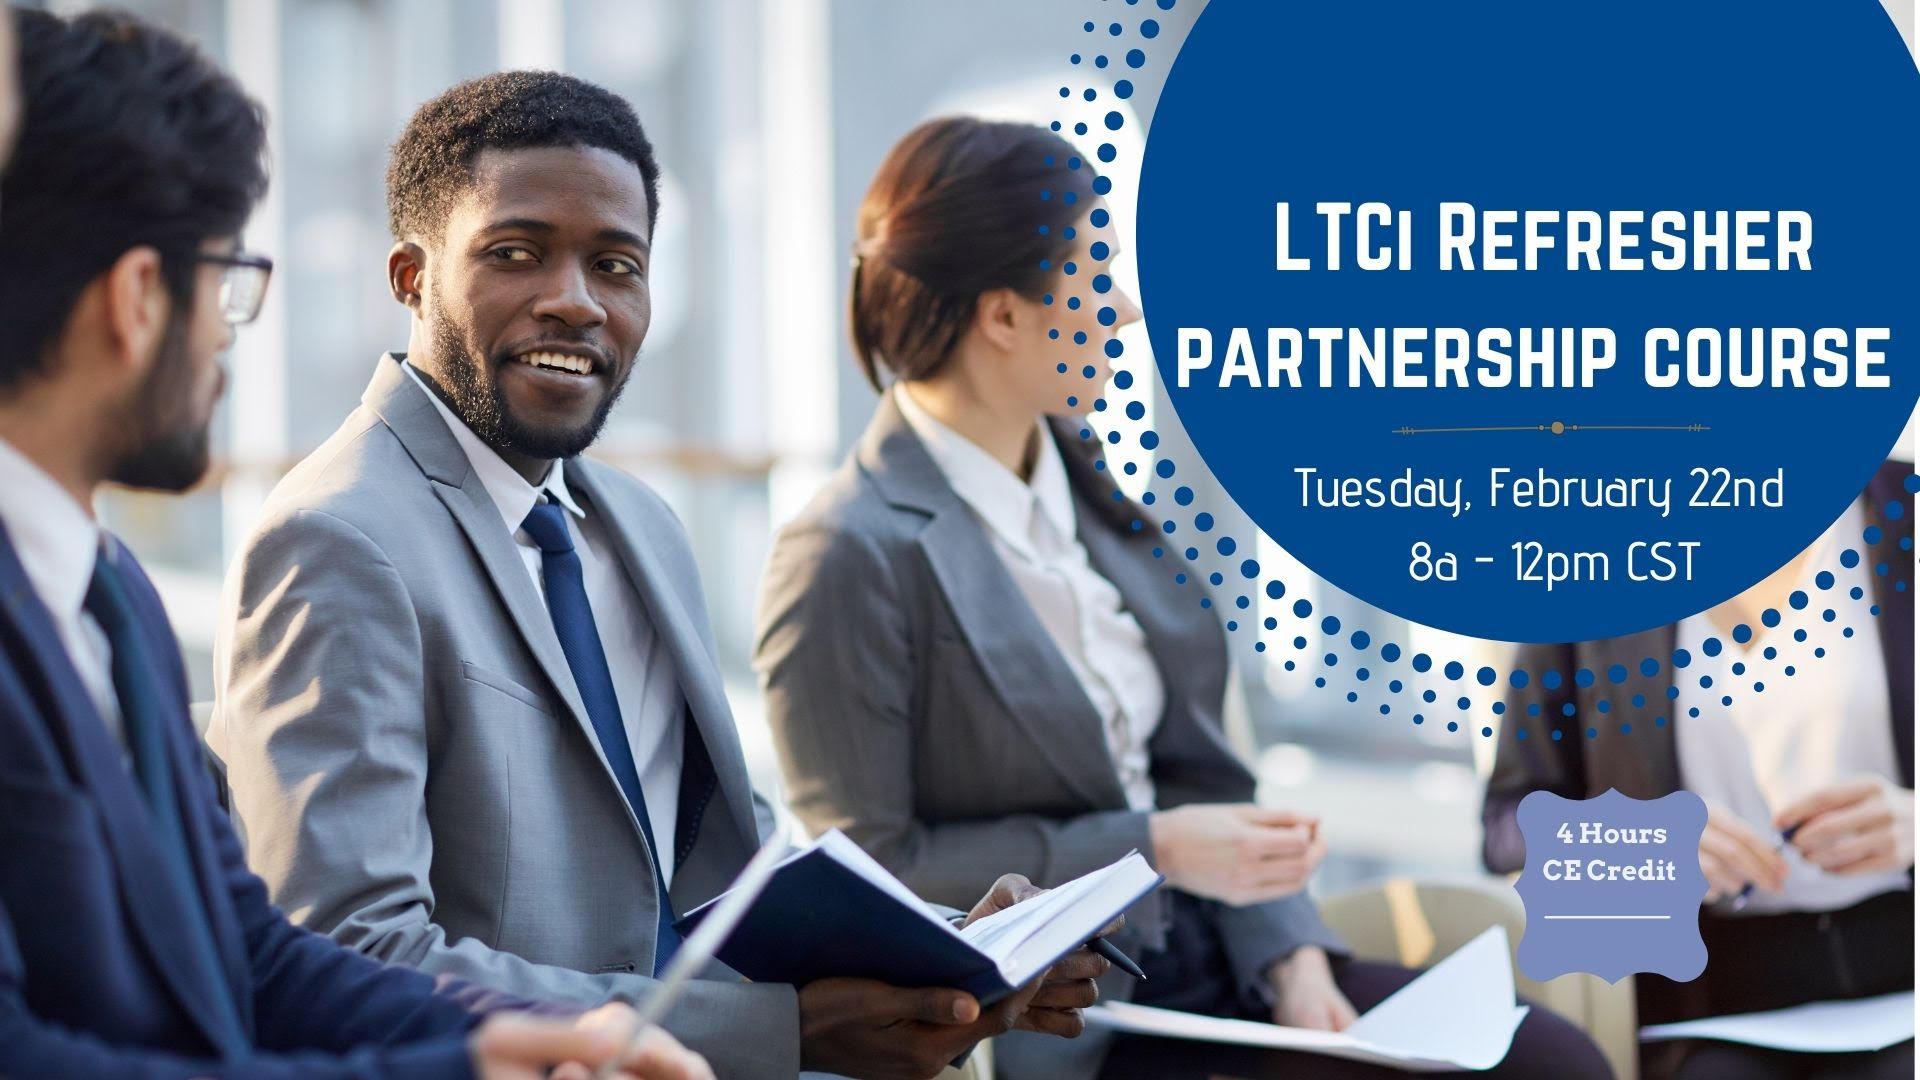 Long-Term Care Refresher Partnership Course